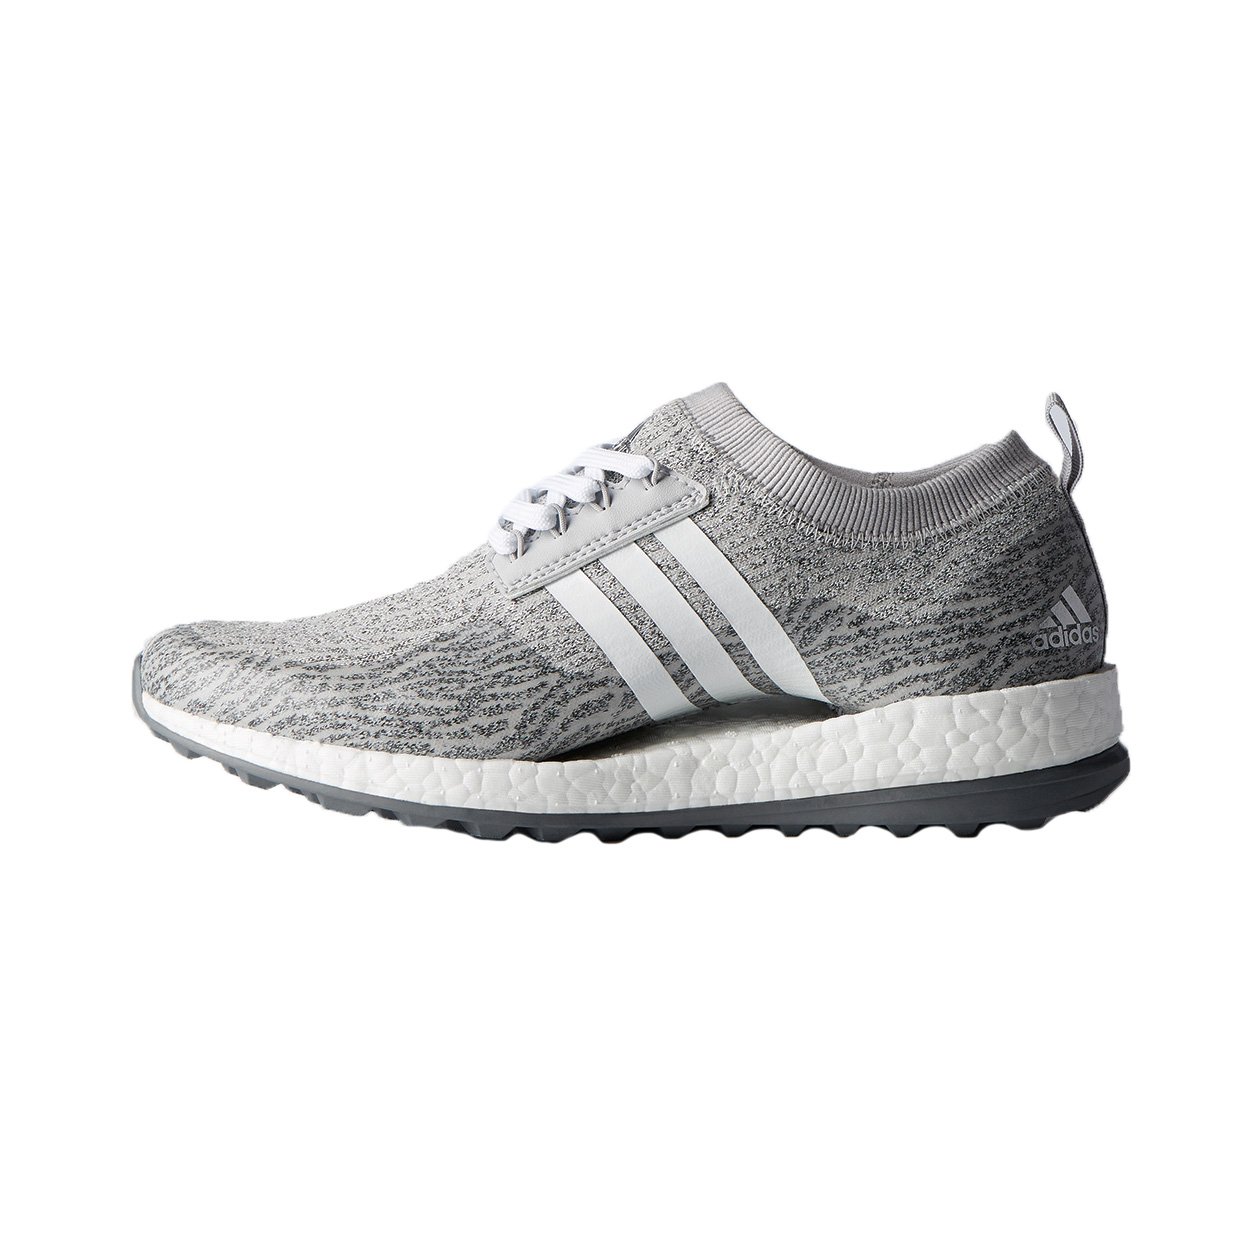 adidas pure boost golf shoes